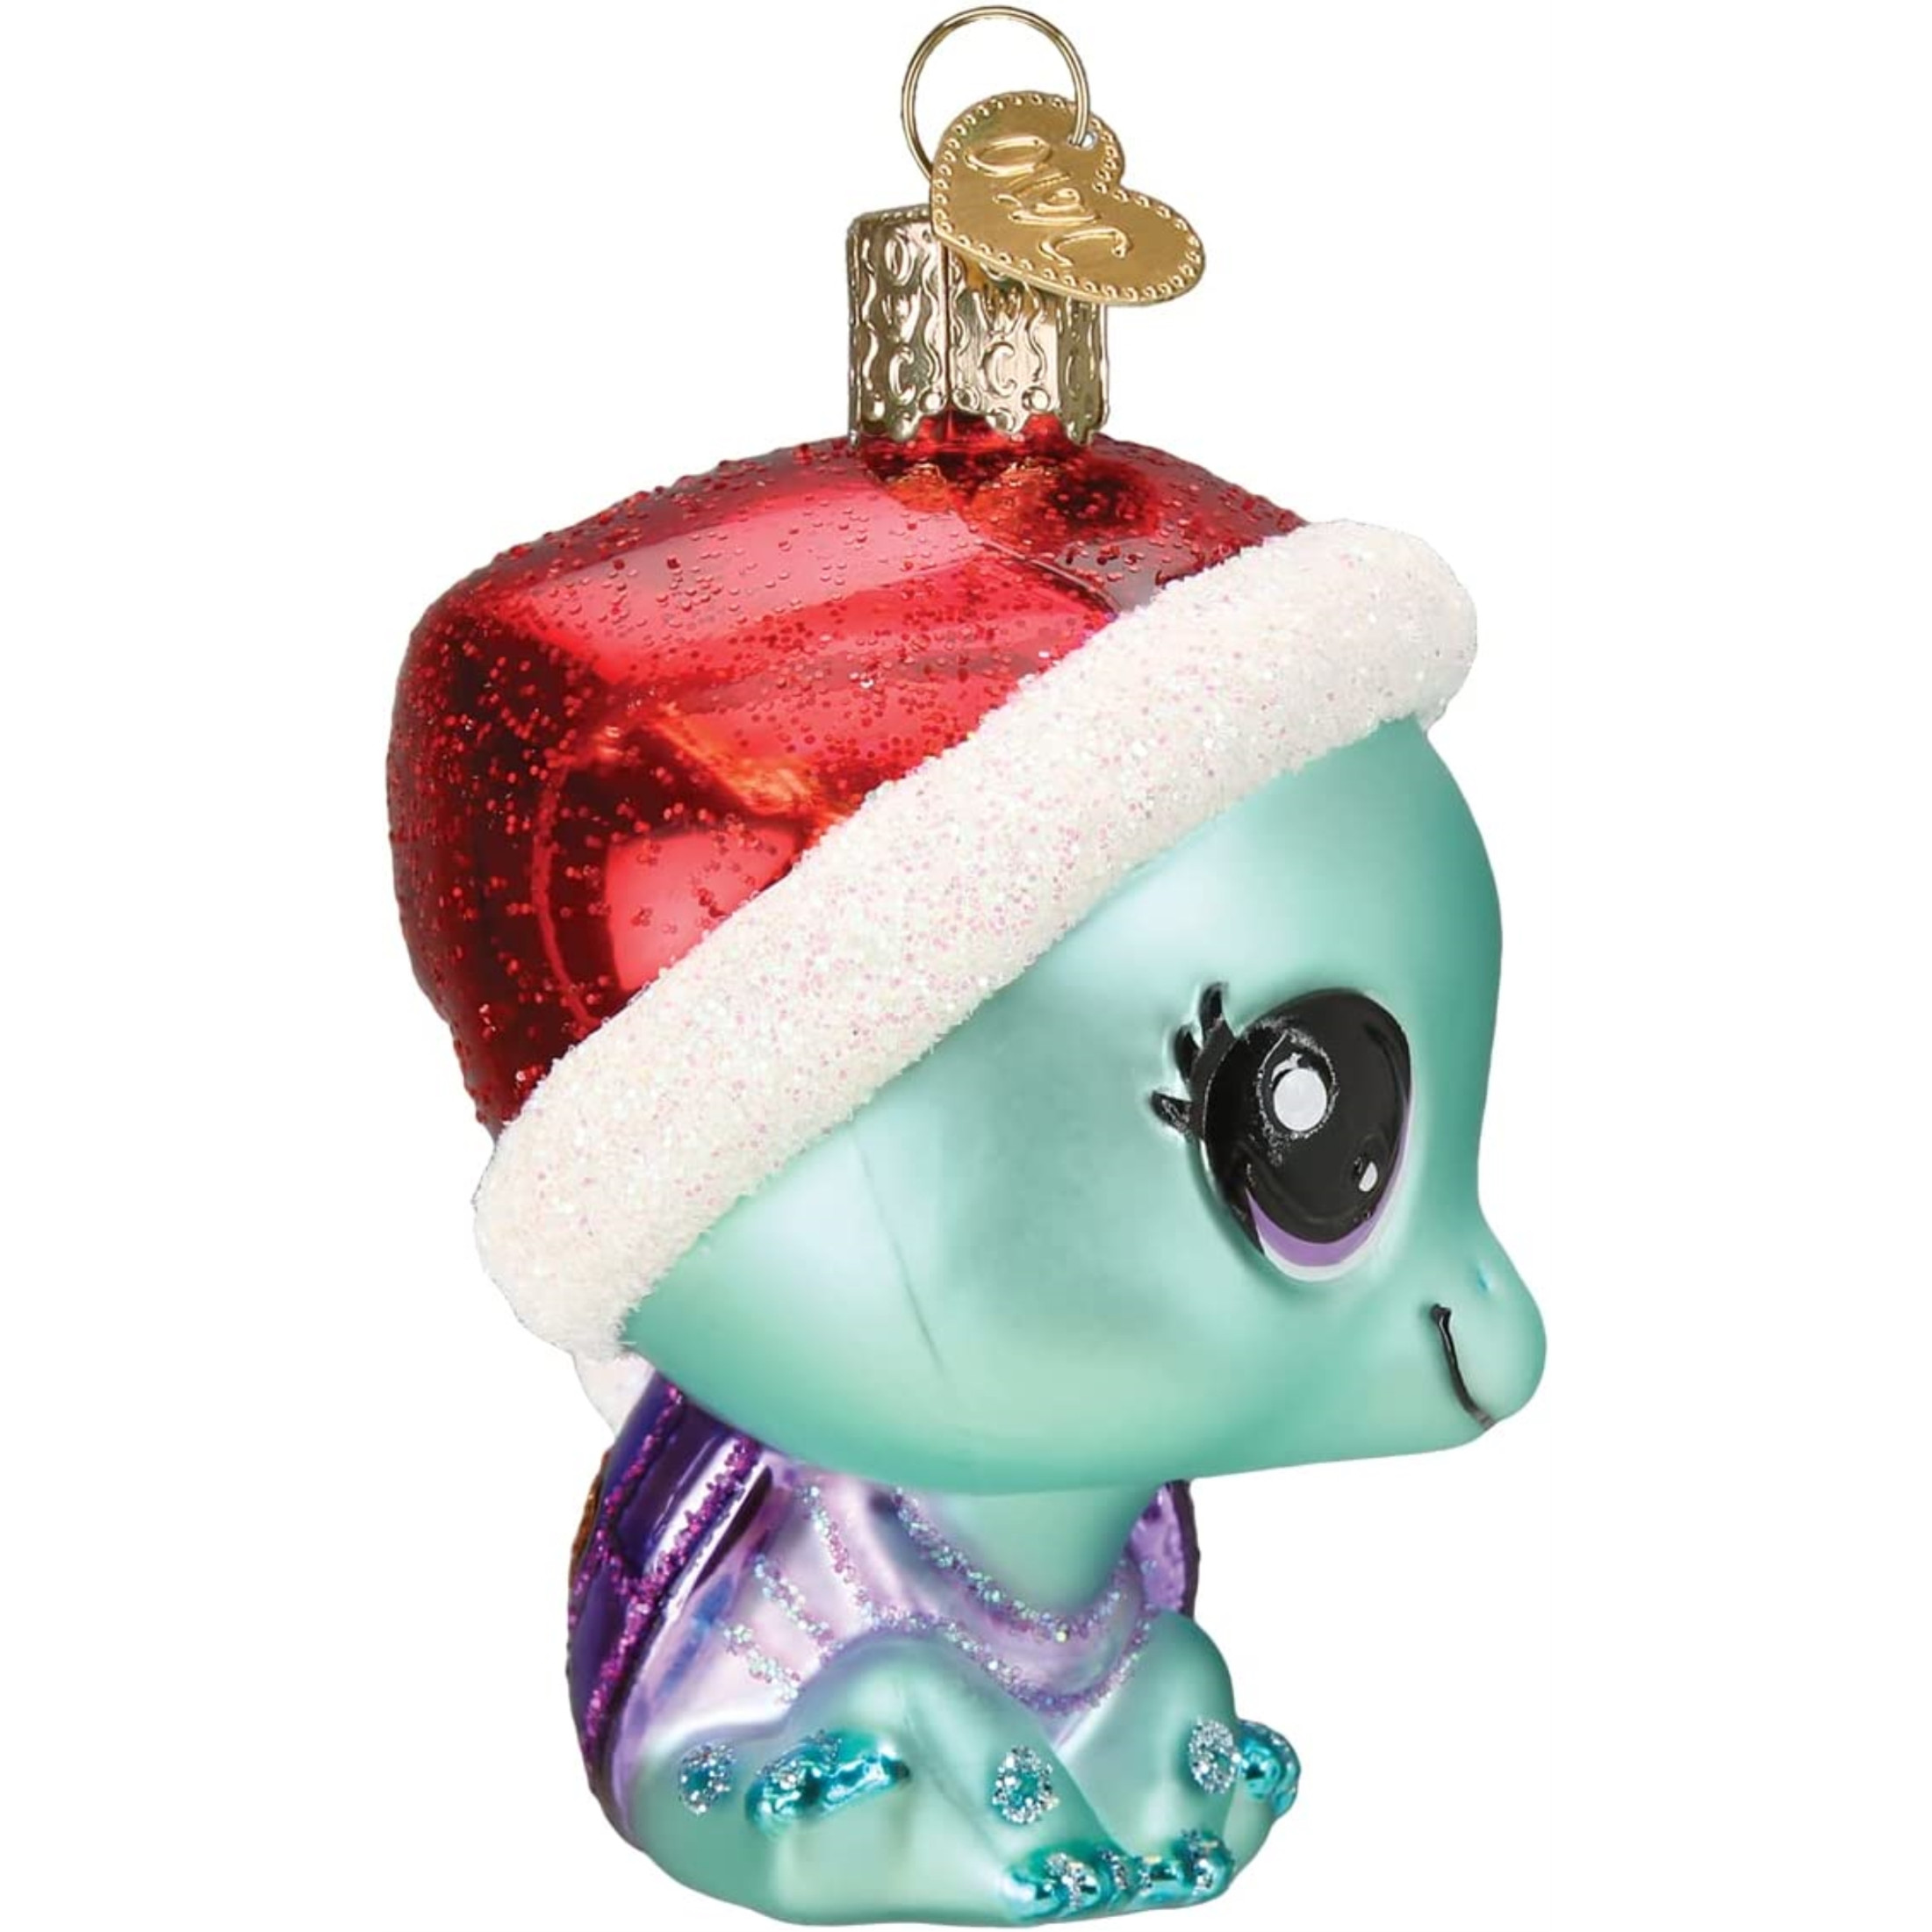 Old World Christmas Glass Blown Christmas Ornament, Littlest Pet Shop Jade  (With OWC Gift Box) 